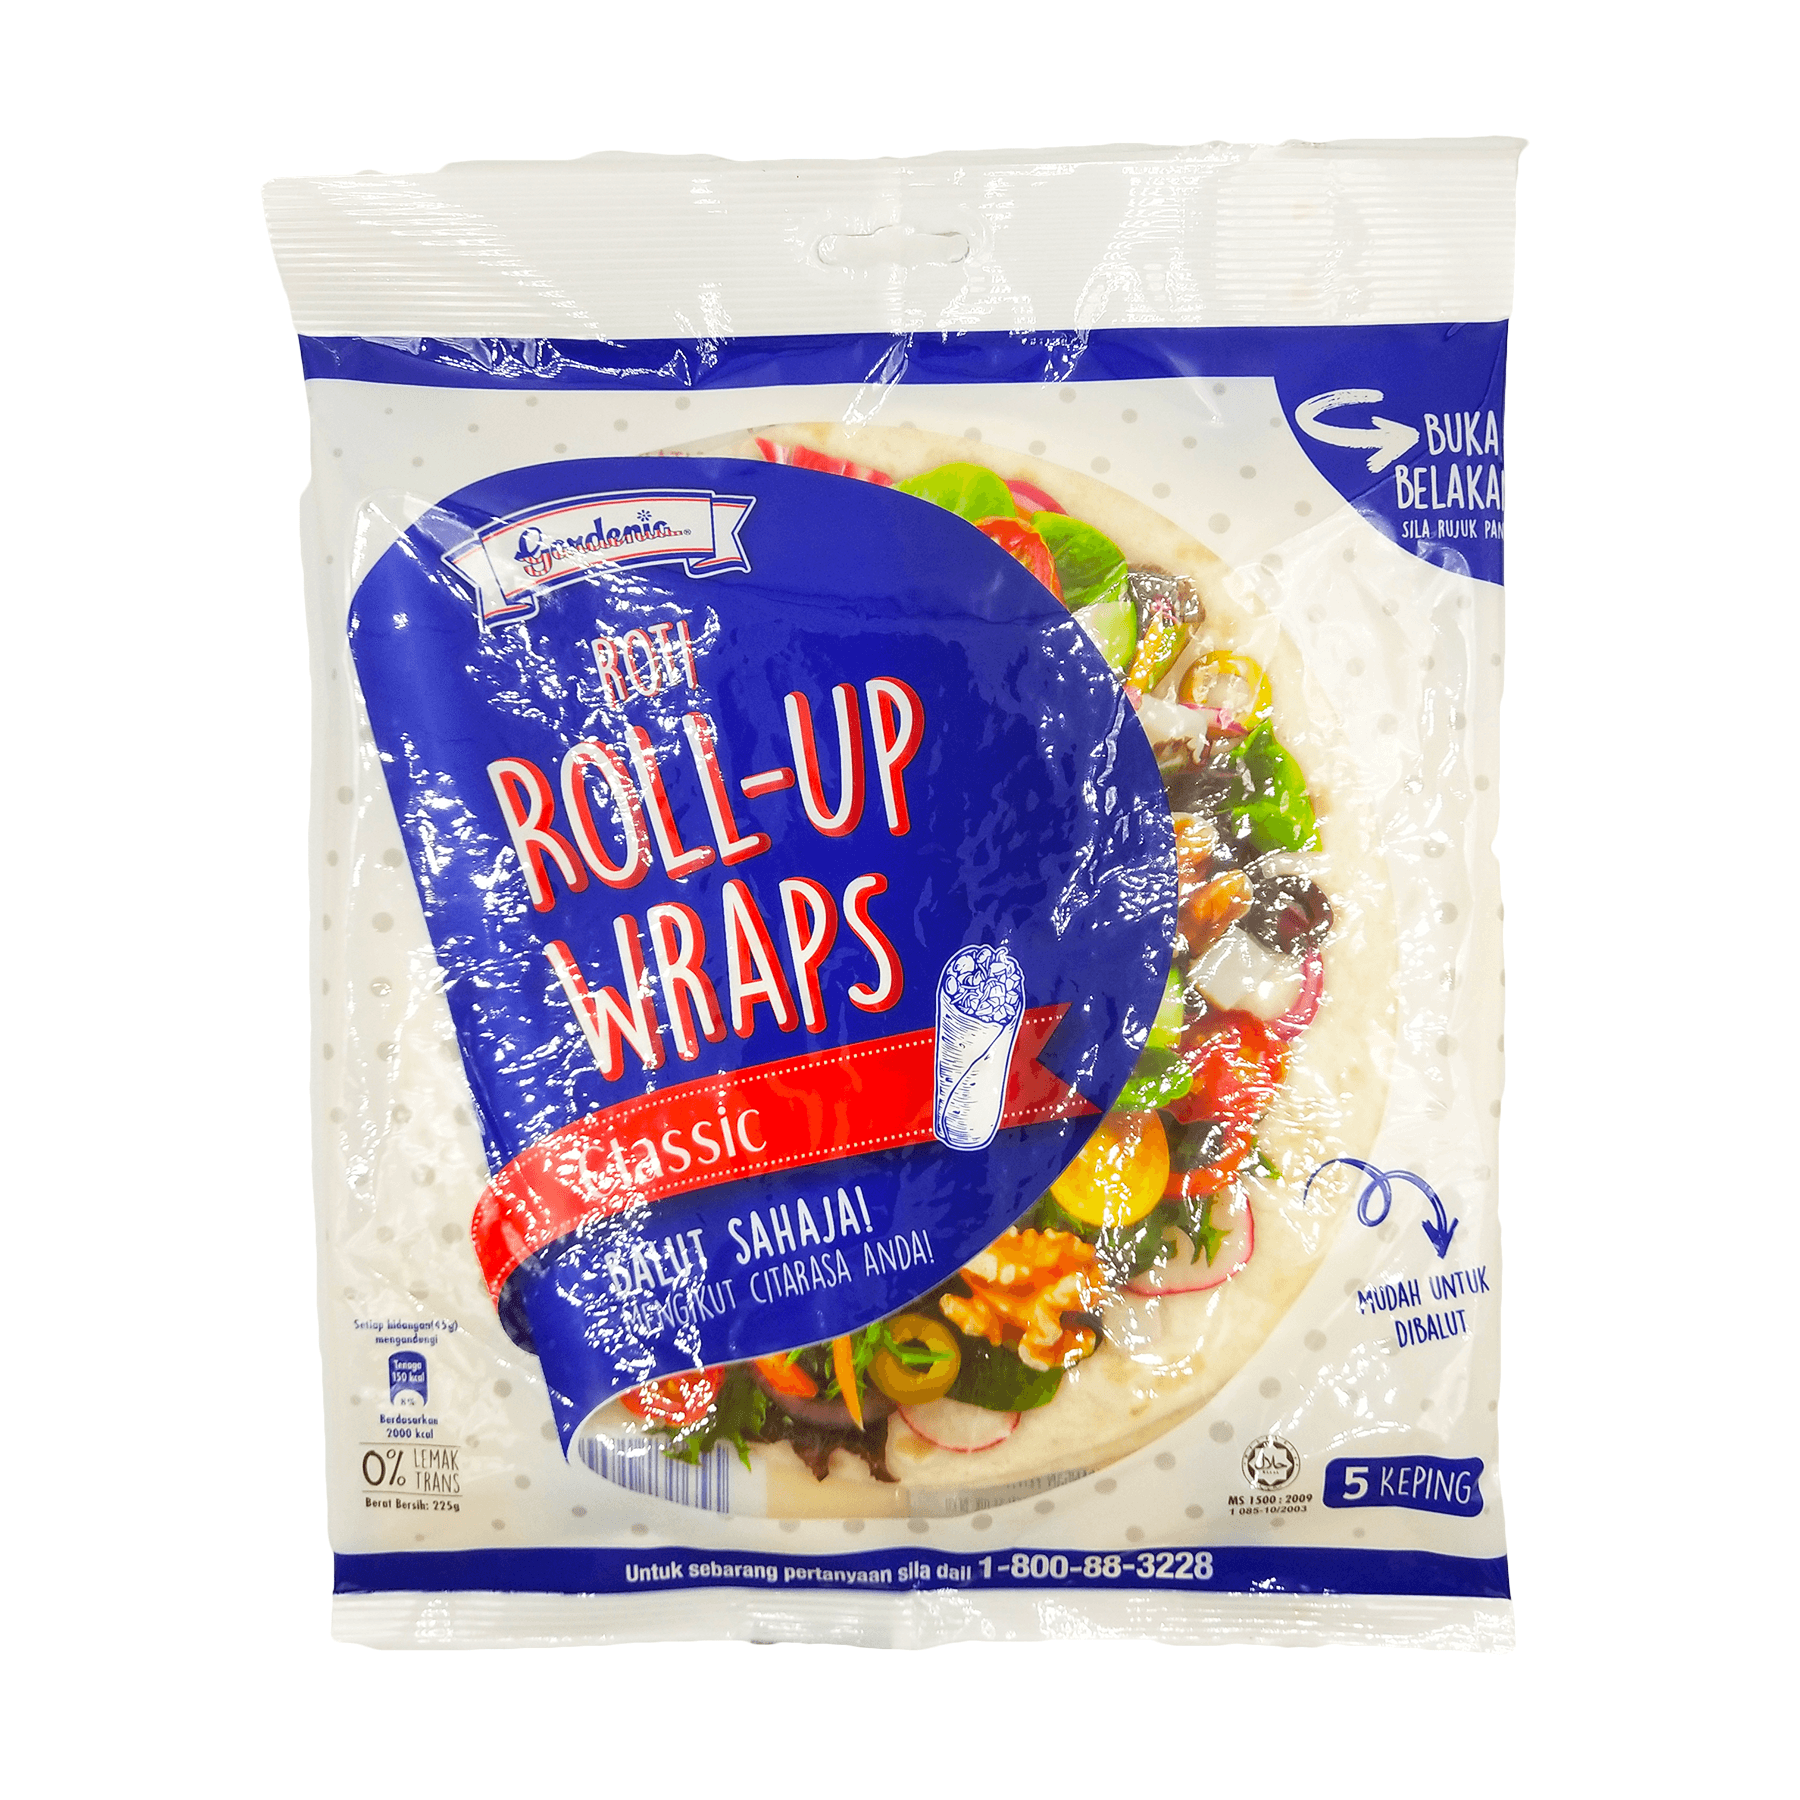 Gardenia Roll-Up Wraps Classic (1).png